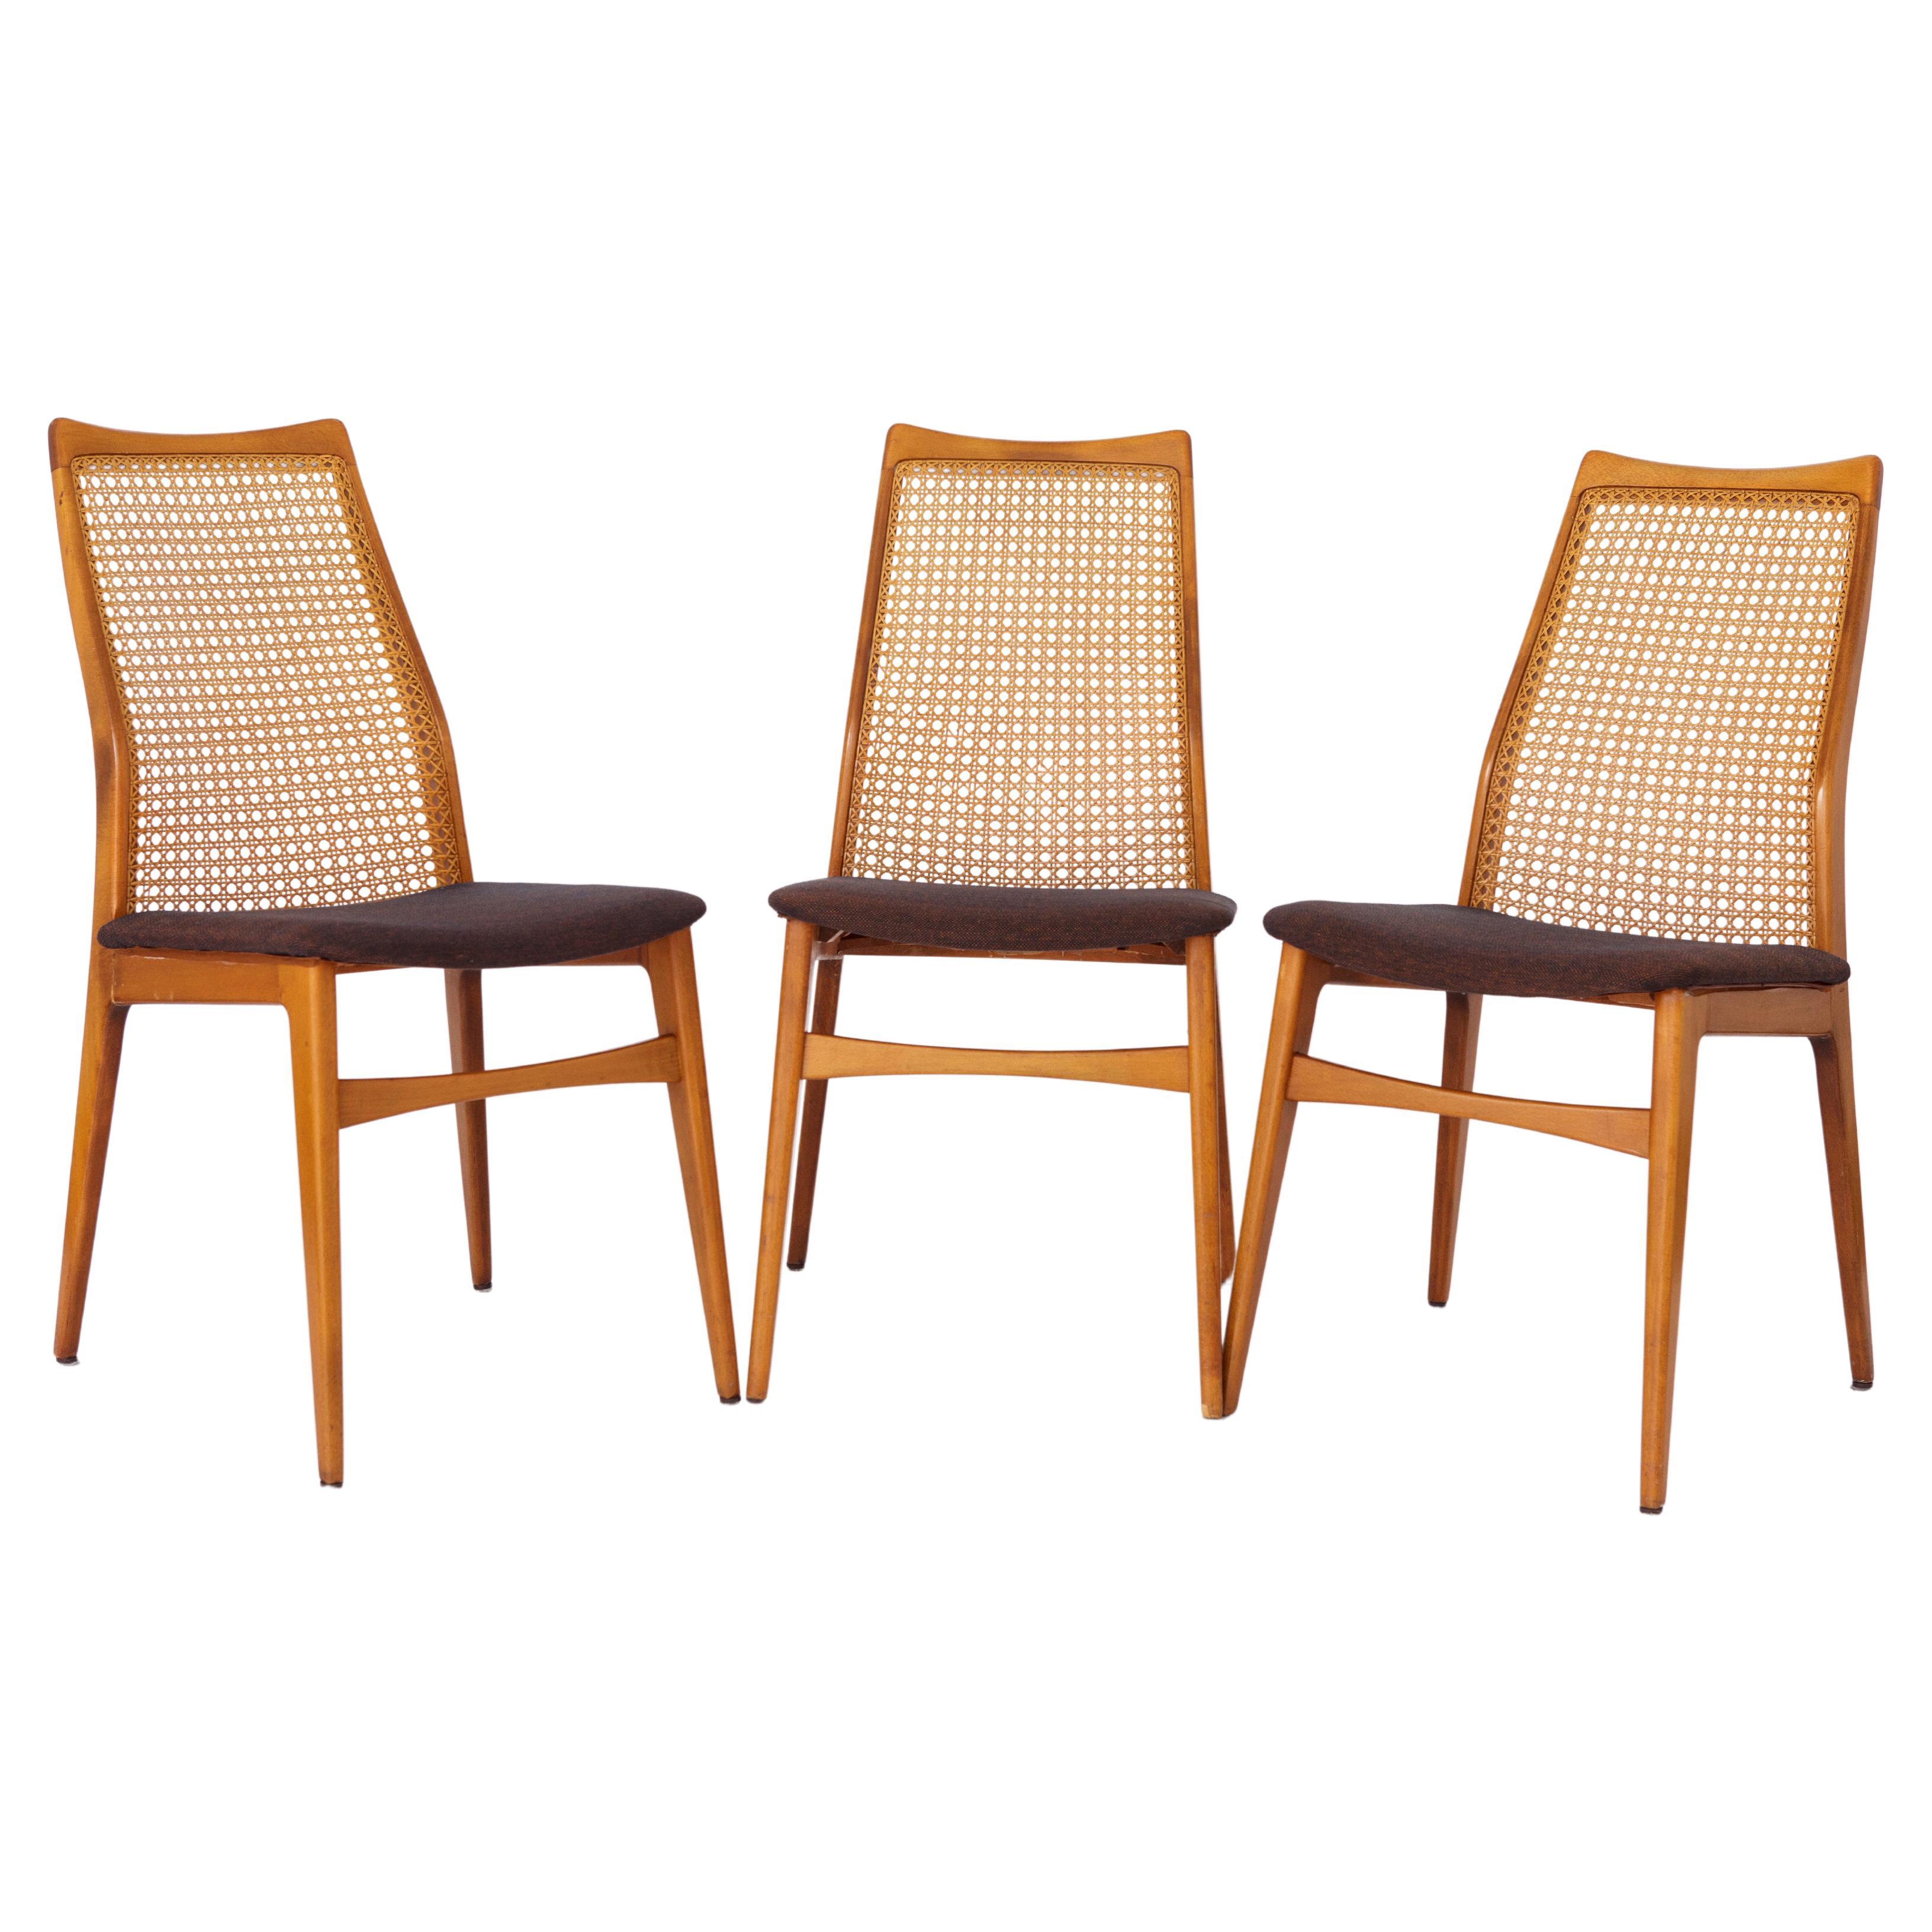 3 Vintage Chairs 1960s Germany by Wilhelm Benze For Sale